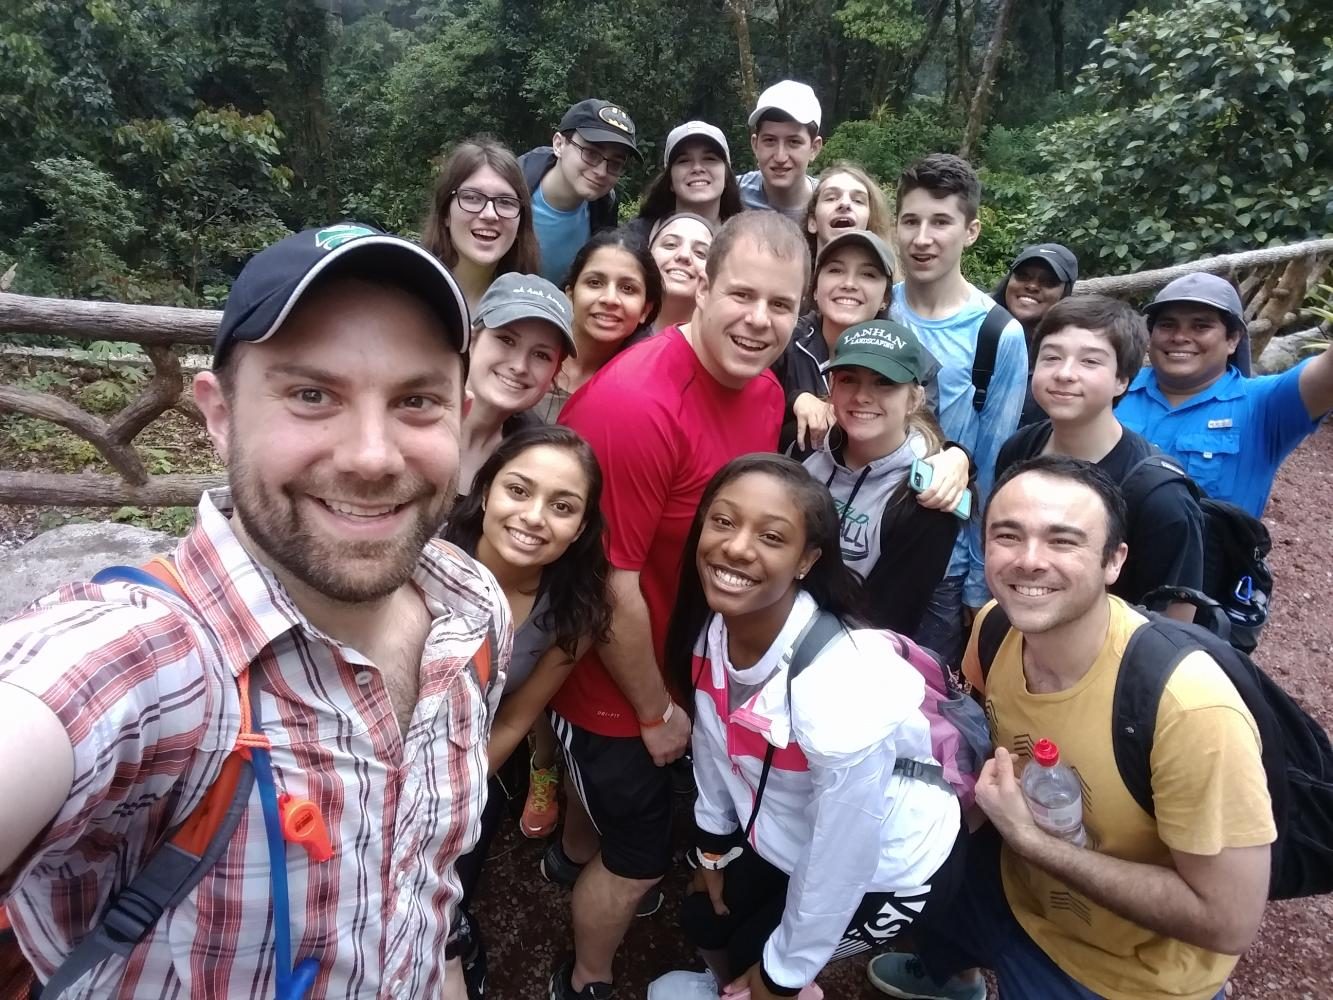 The spring break trip to Costa Rica was chaperoned by Mr. Phil Deaton and Mr. Corey Rice.